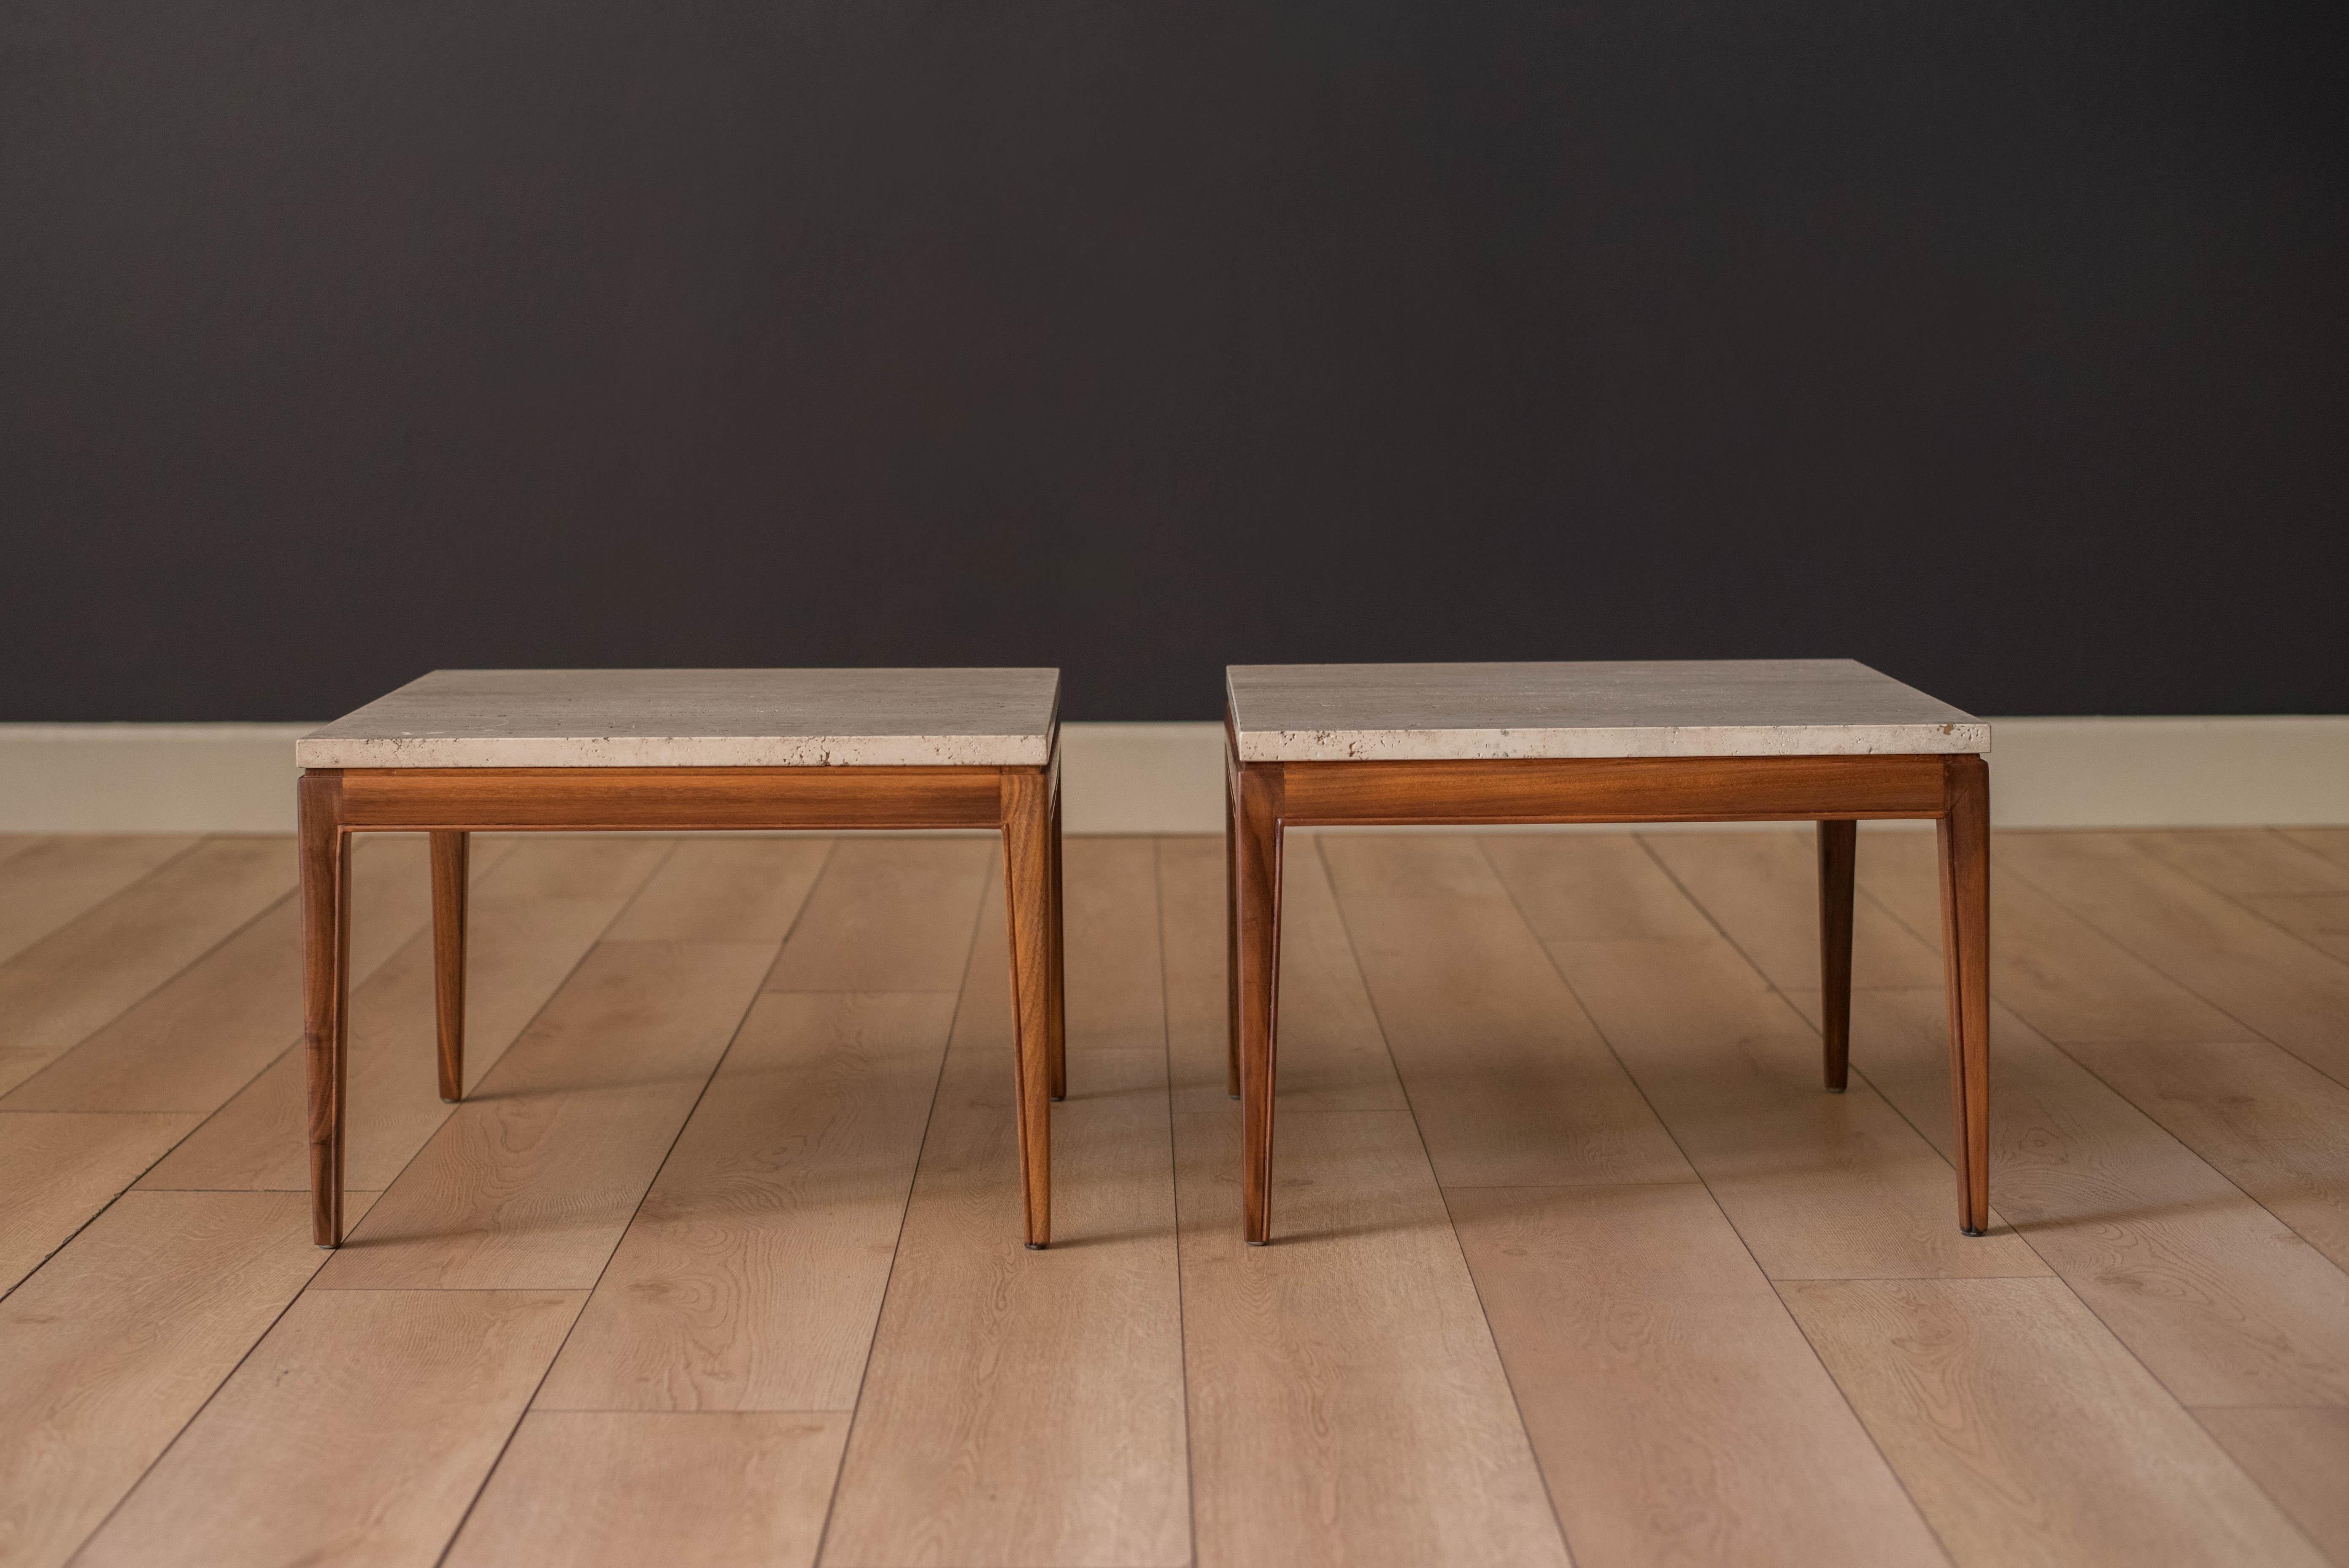 Mid-Century Modern pair of low framed walnut side tables circa 1960's. The travertine square tops display a cream and beige natural stone finish, marked made in Italy. Price is for the pair.